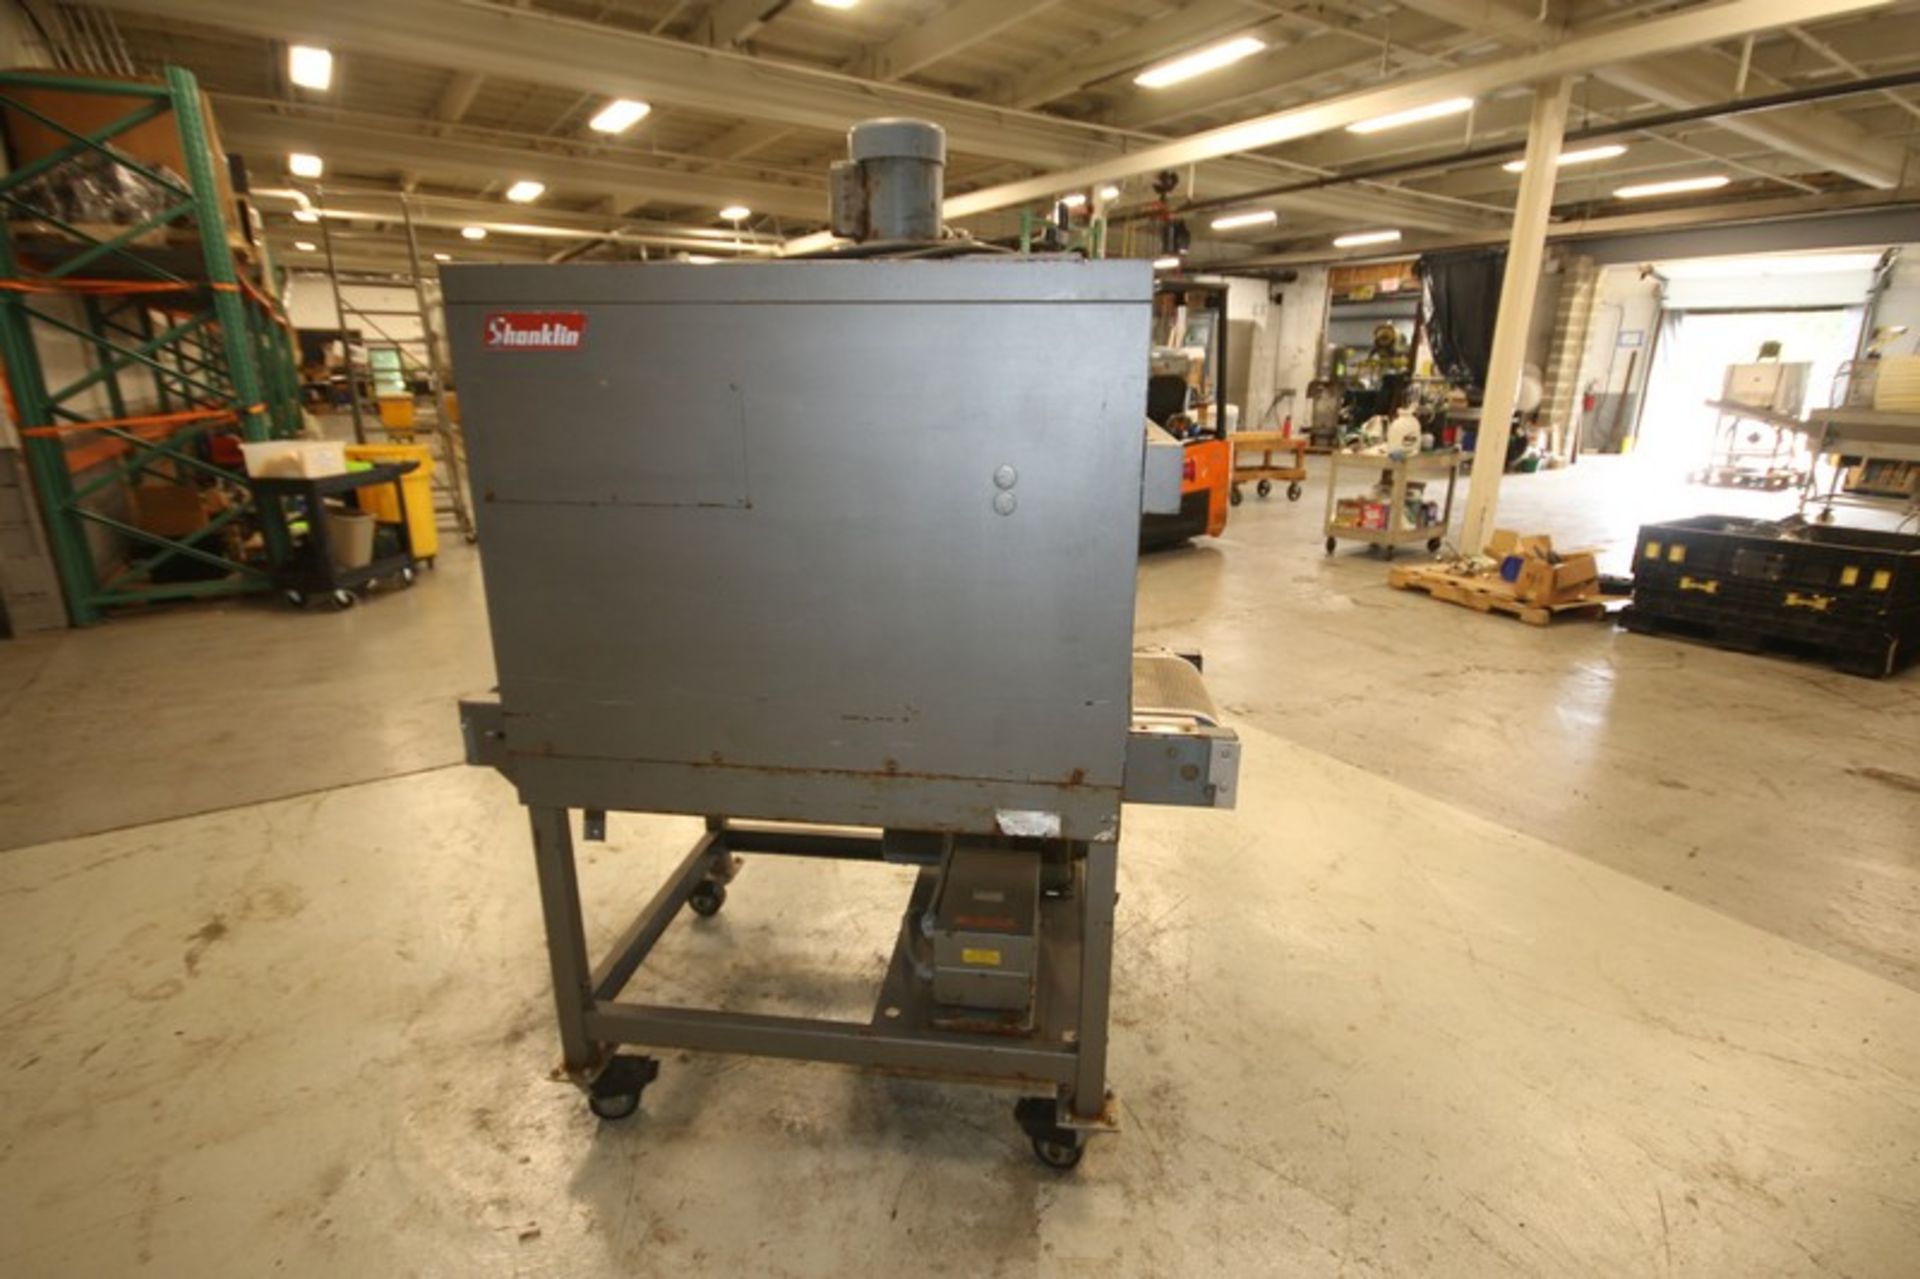 Shanklin 15" W x 9"H, Shrink Wrap Heat Tunnel, Model T-7XL, SN T-96342, 460 V 3 Phase, Mounted on - Image 4 of 10